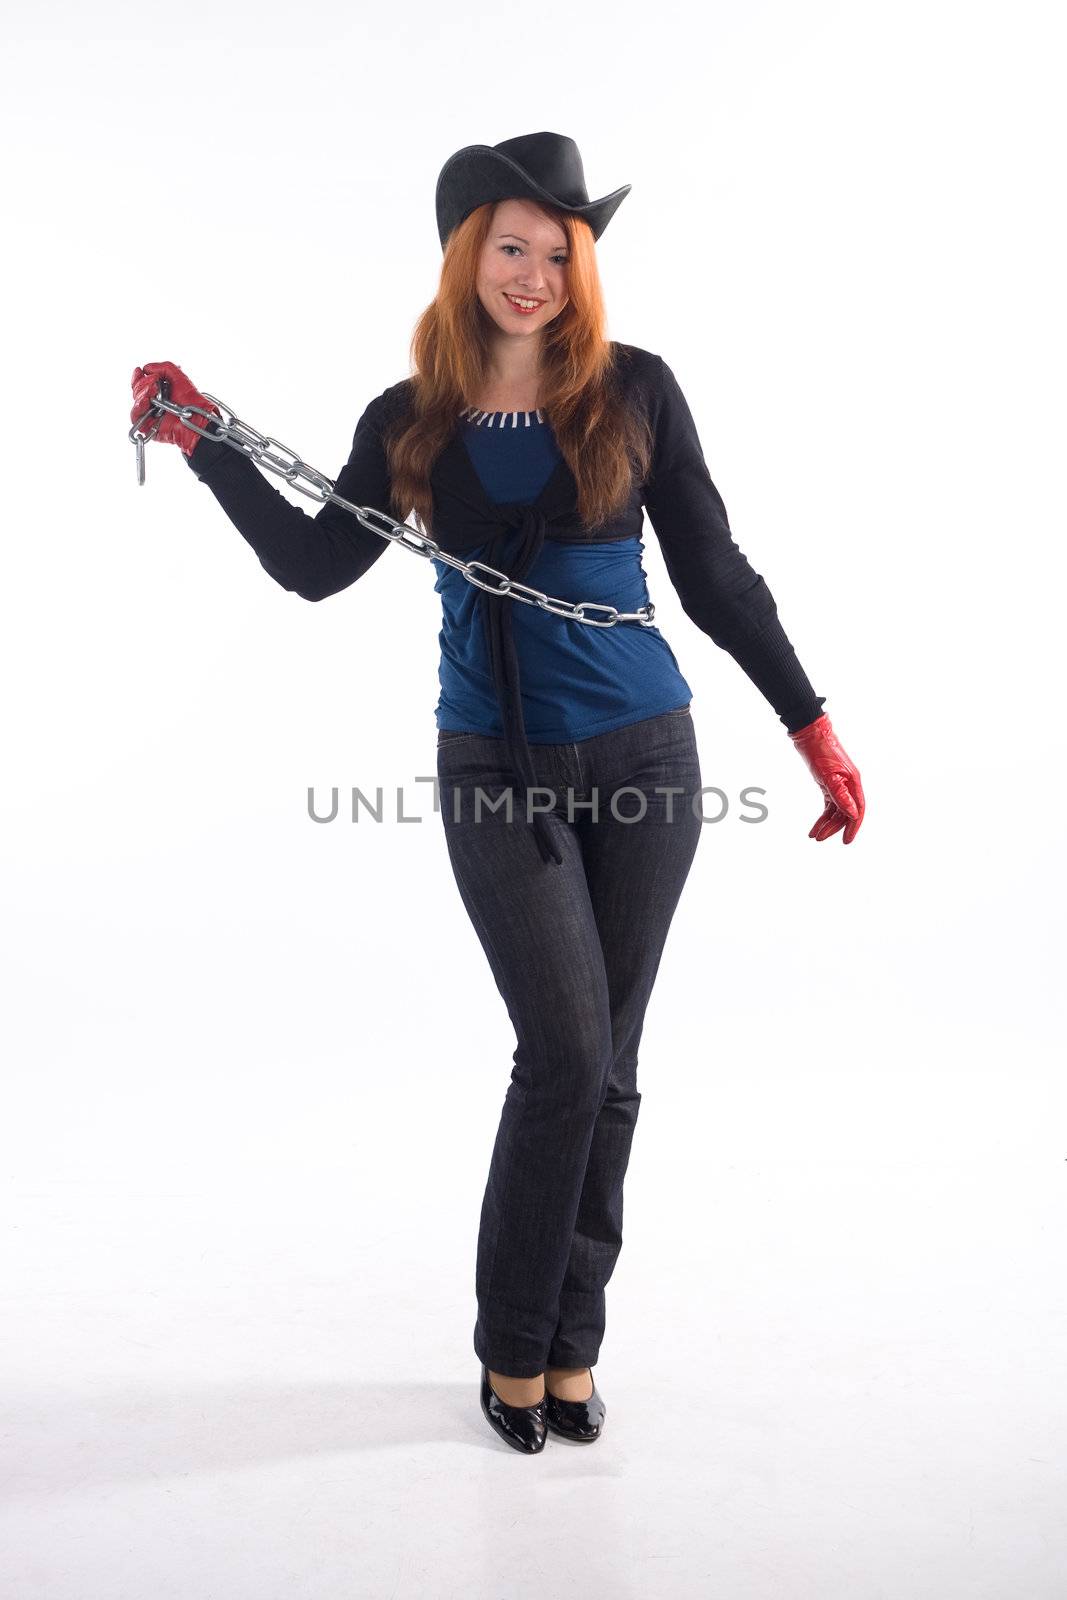 Young girl with red gloves, chain and black hat standing on white background
